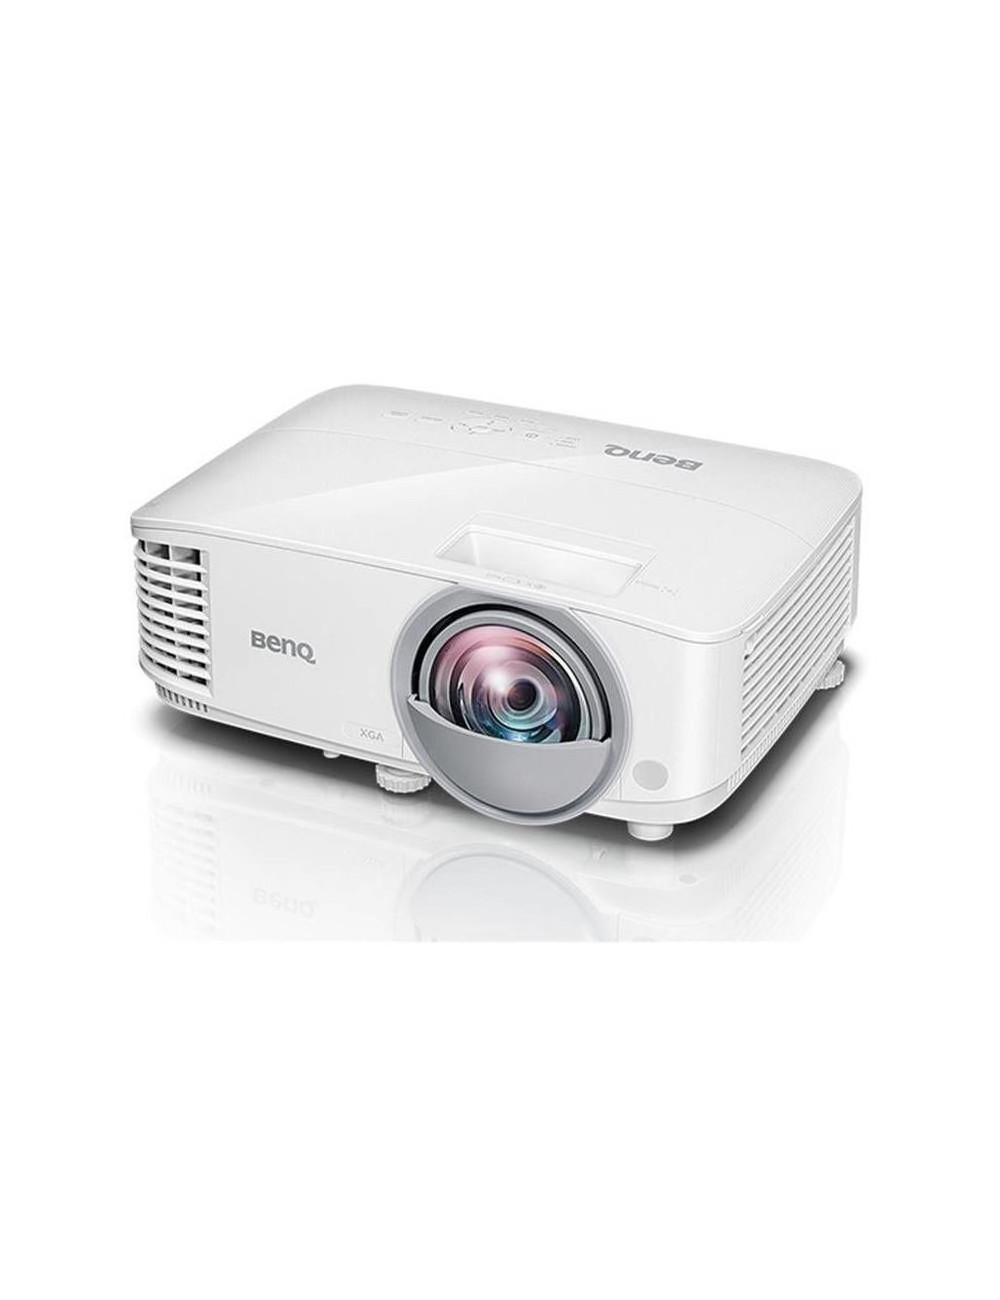 Benq Interactive Projector with Short Throw MX808STH XGA (1024x768), 3600 ANSI lumens, White, Lamp warranty 12 month(s)